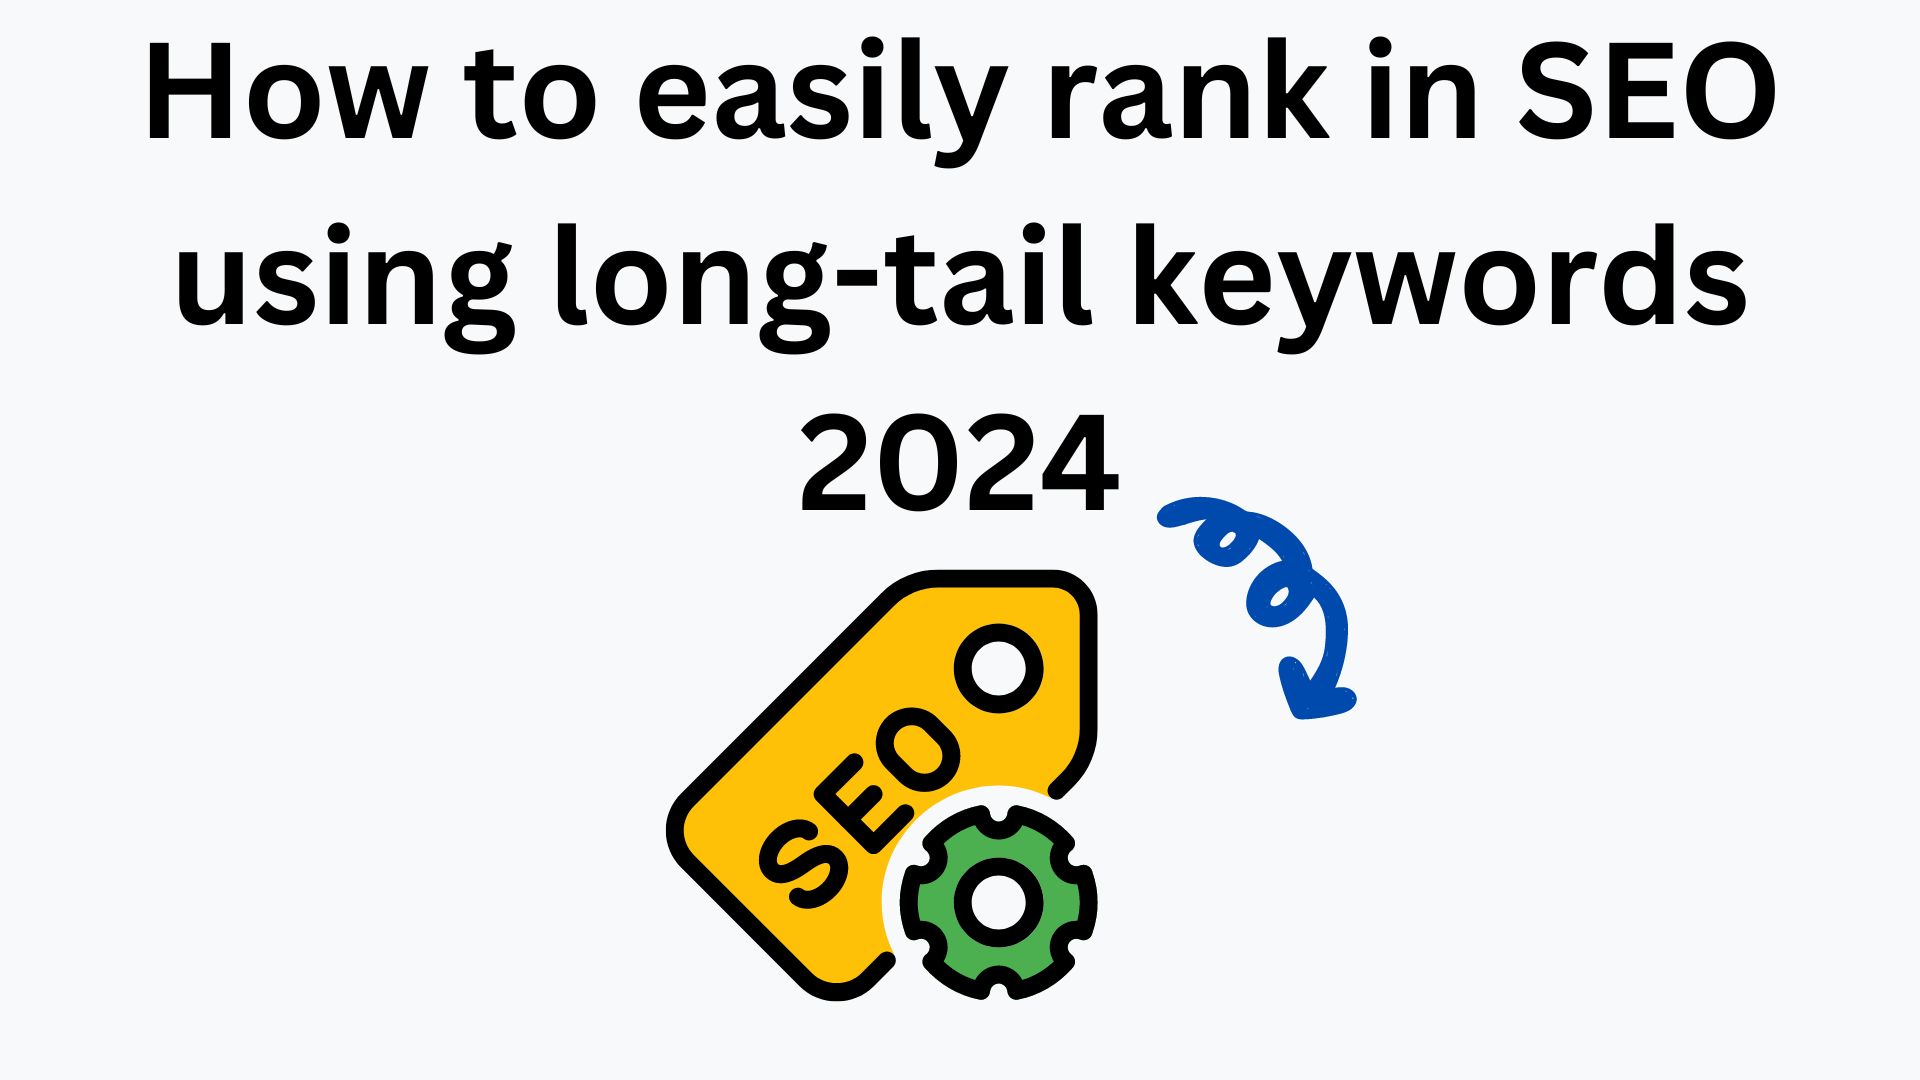 How To Easily Rank In Seo Using Long-Tail Keywords 2024